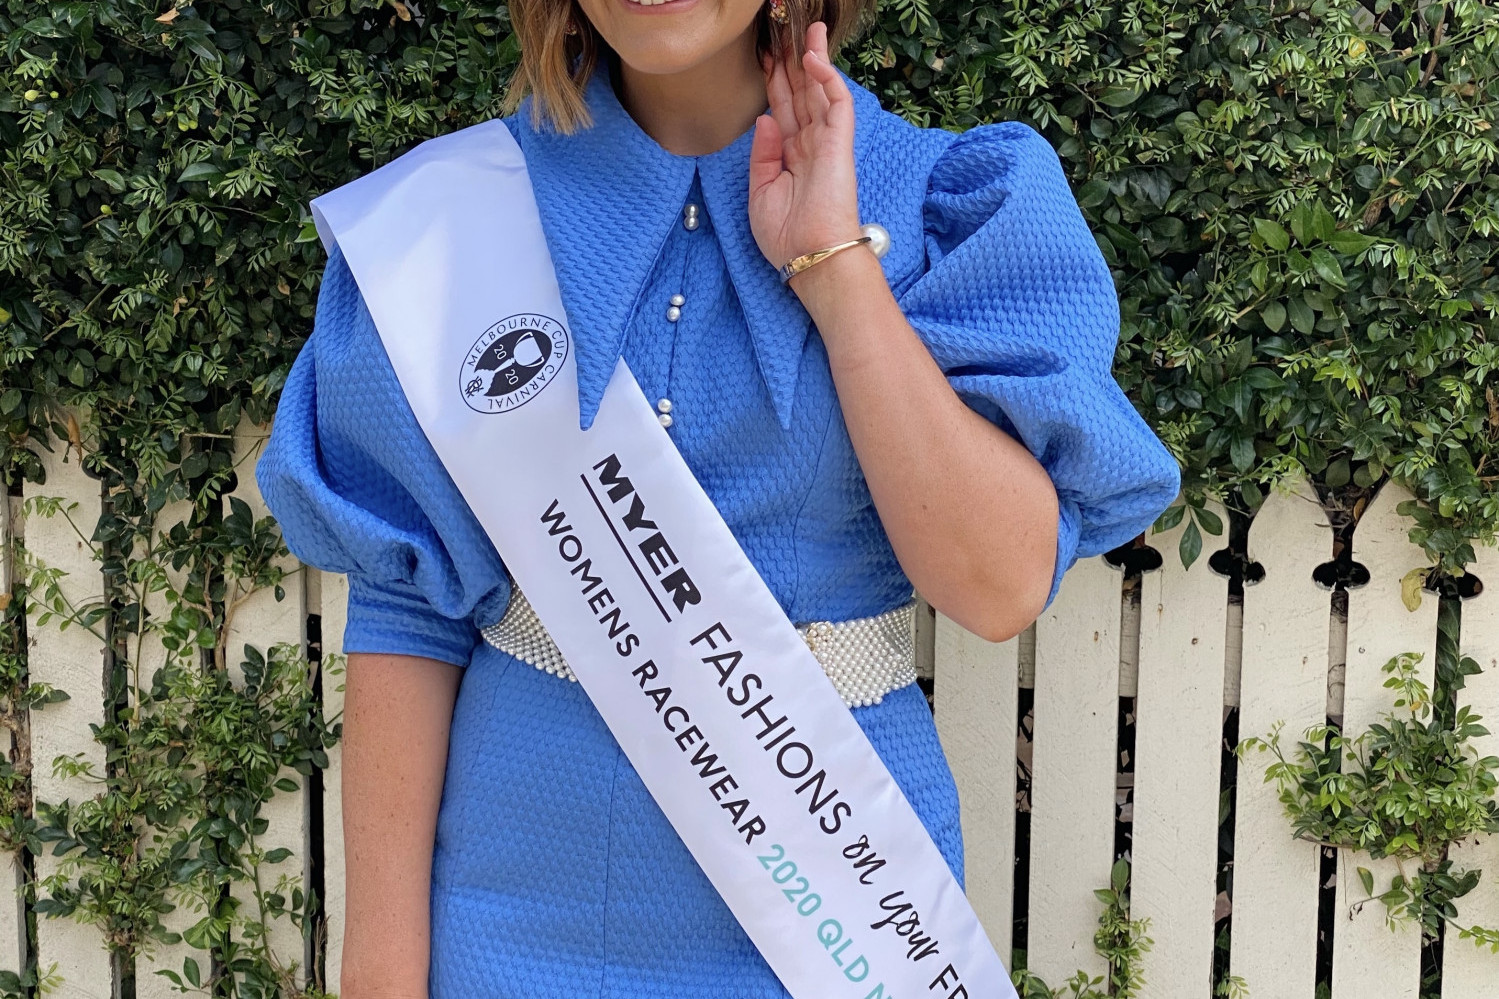 FASHION: Kerrie Carucci, a Mareeba local now turned Brisbane fashion stylist recently competed in the Myer Fashions on Your Front Lawn competition in Women’s Racewear where she was named the Queensland representative.